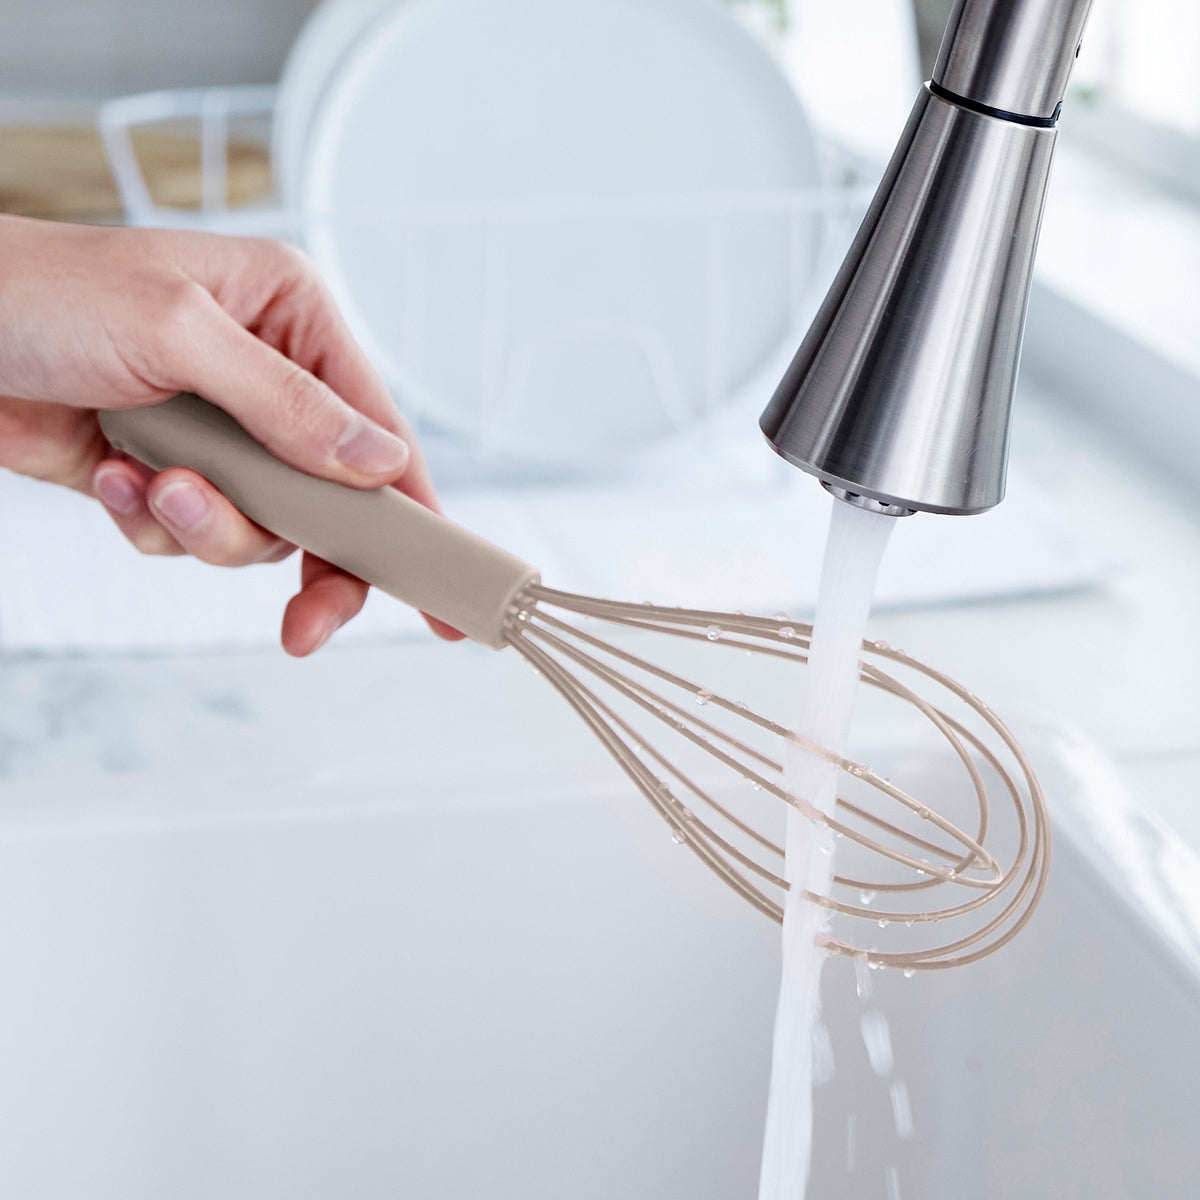 Healthy Non-Toxic PFAS Free Cookware - Platinum Silicone Whisk by GreenPan